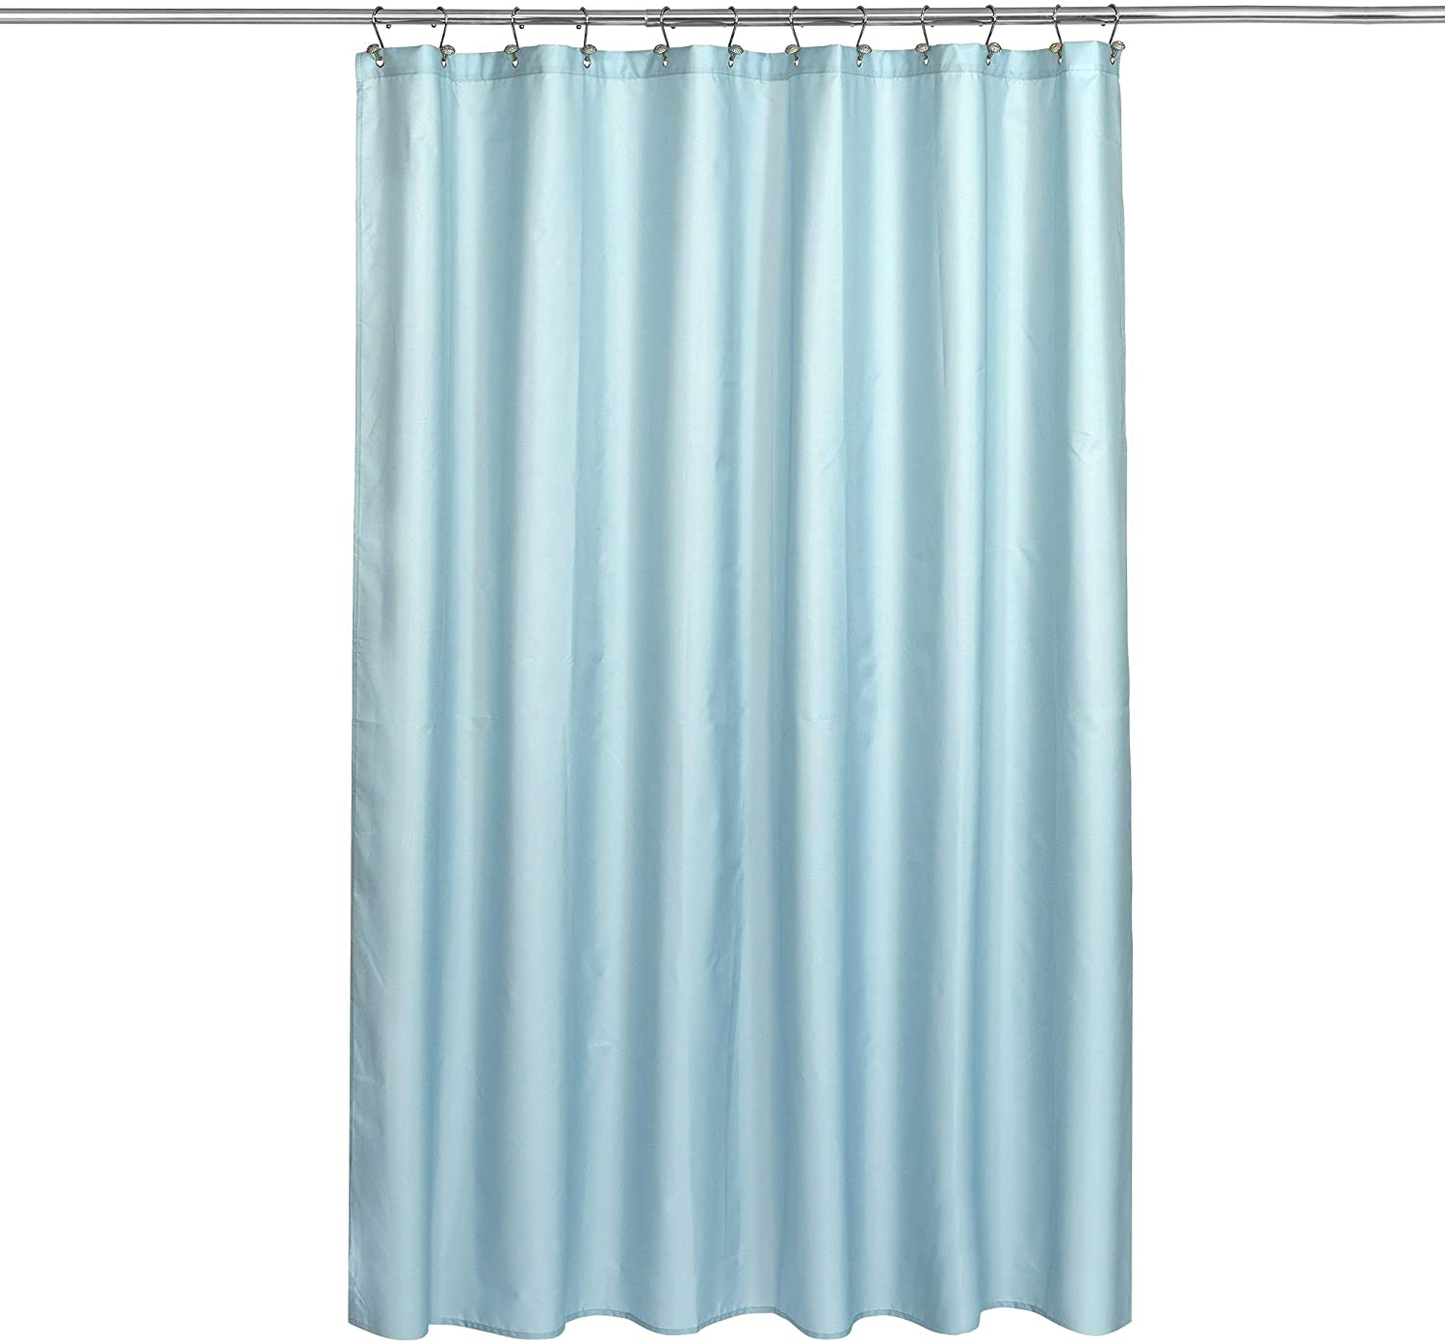 N&Y HOME Fabric Shower Stall Curtain or Liner Hotel Quality, Machine Washable, Water Repellent